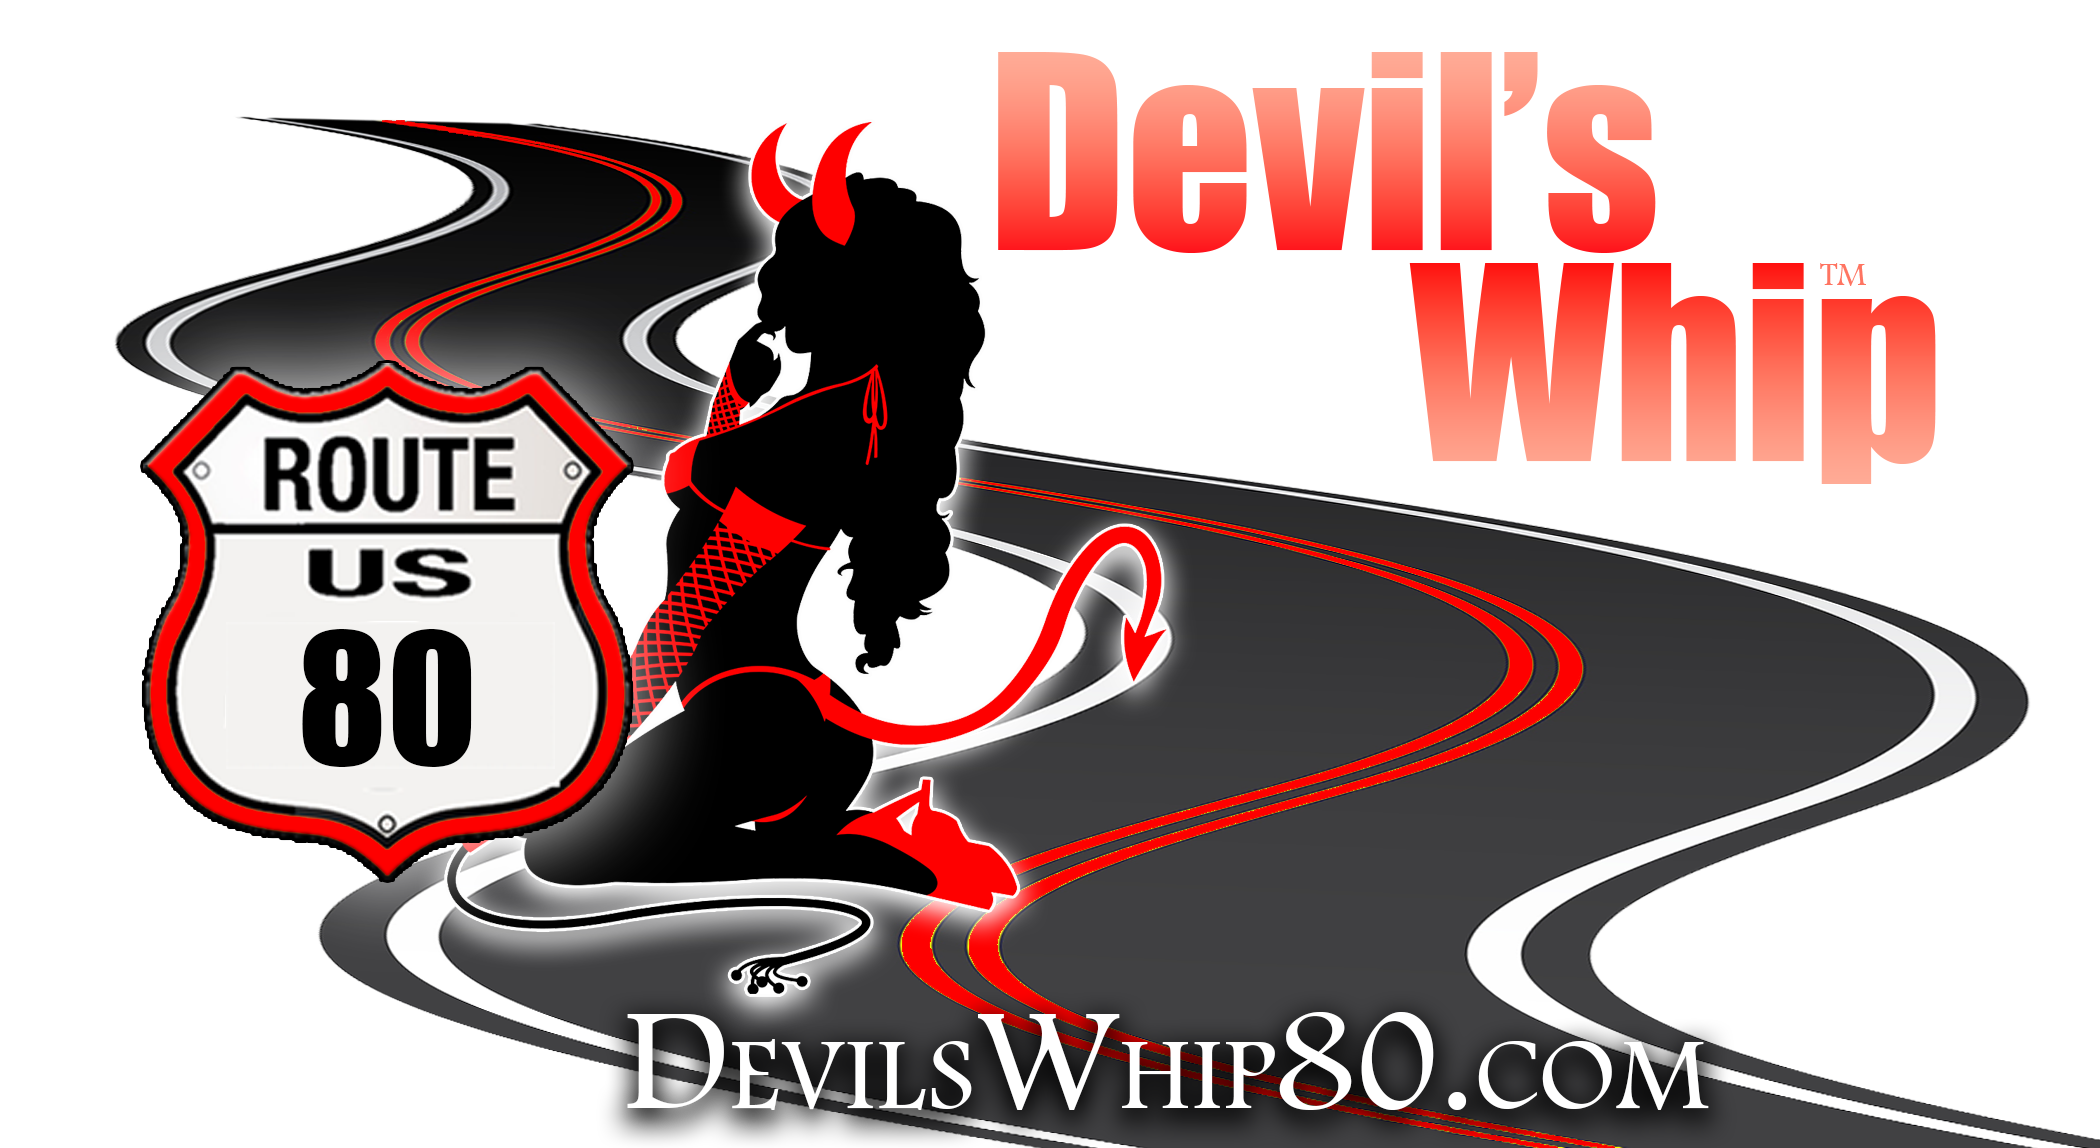 The Devils Whip Route 80 Motorcycle Ride